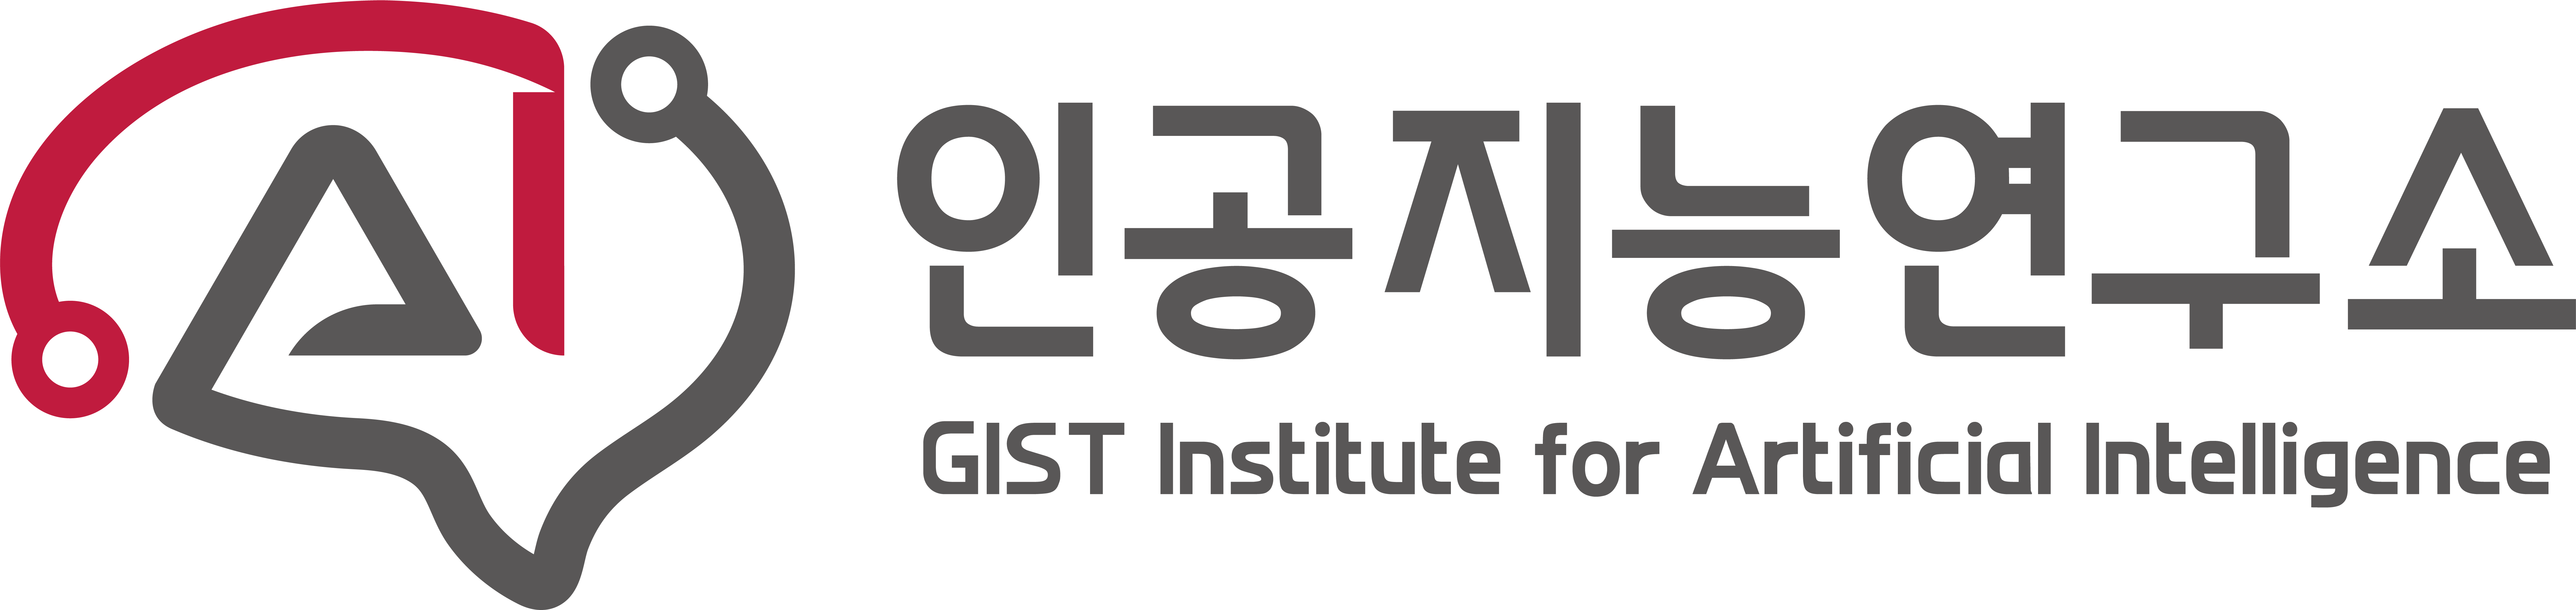 Artificial Intelligence Research Institute